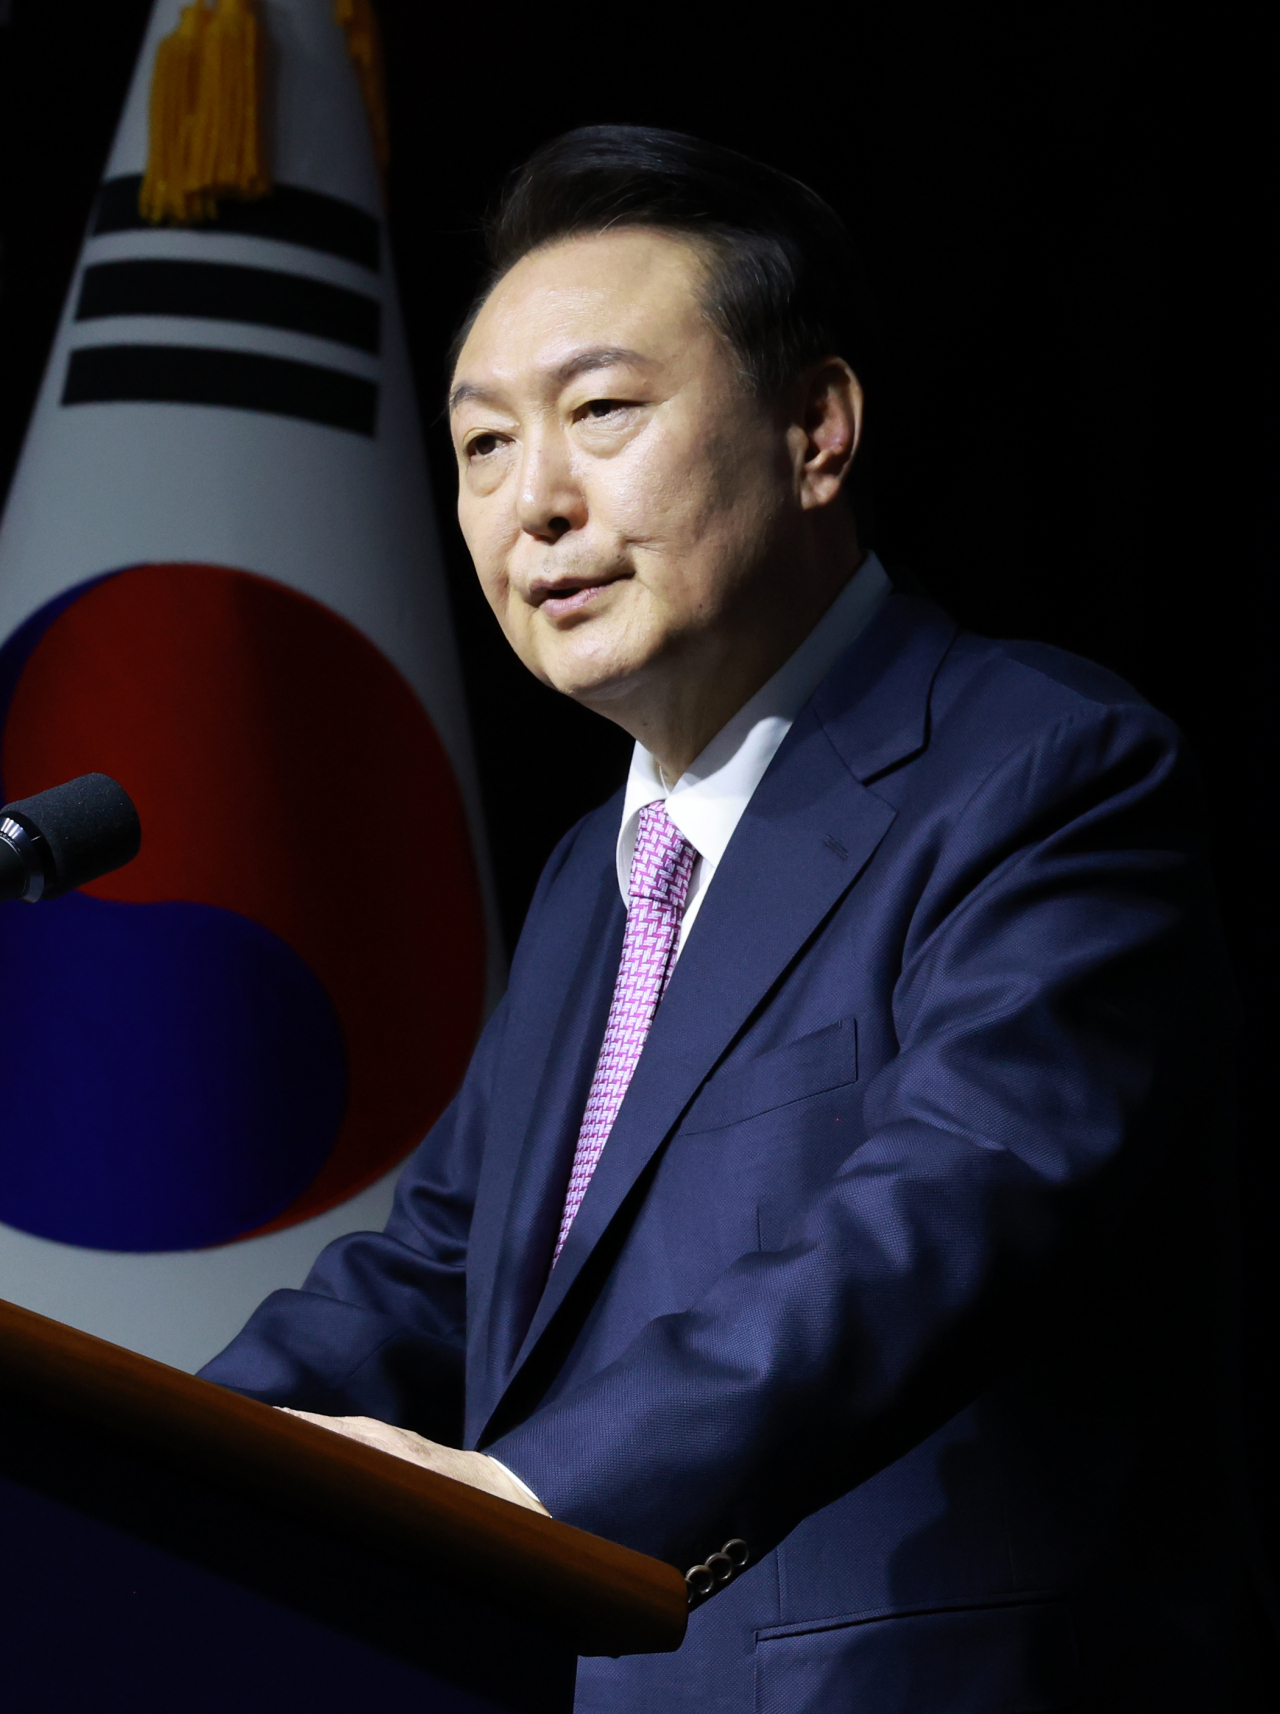 President Yoon Suk Yeol speaks during an event marking the 51st Commerce & Industry Day held at 63 Convention Center in Seoul, Wednesday. (Yonhap)